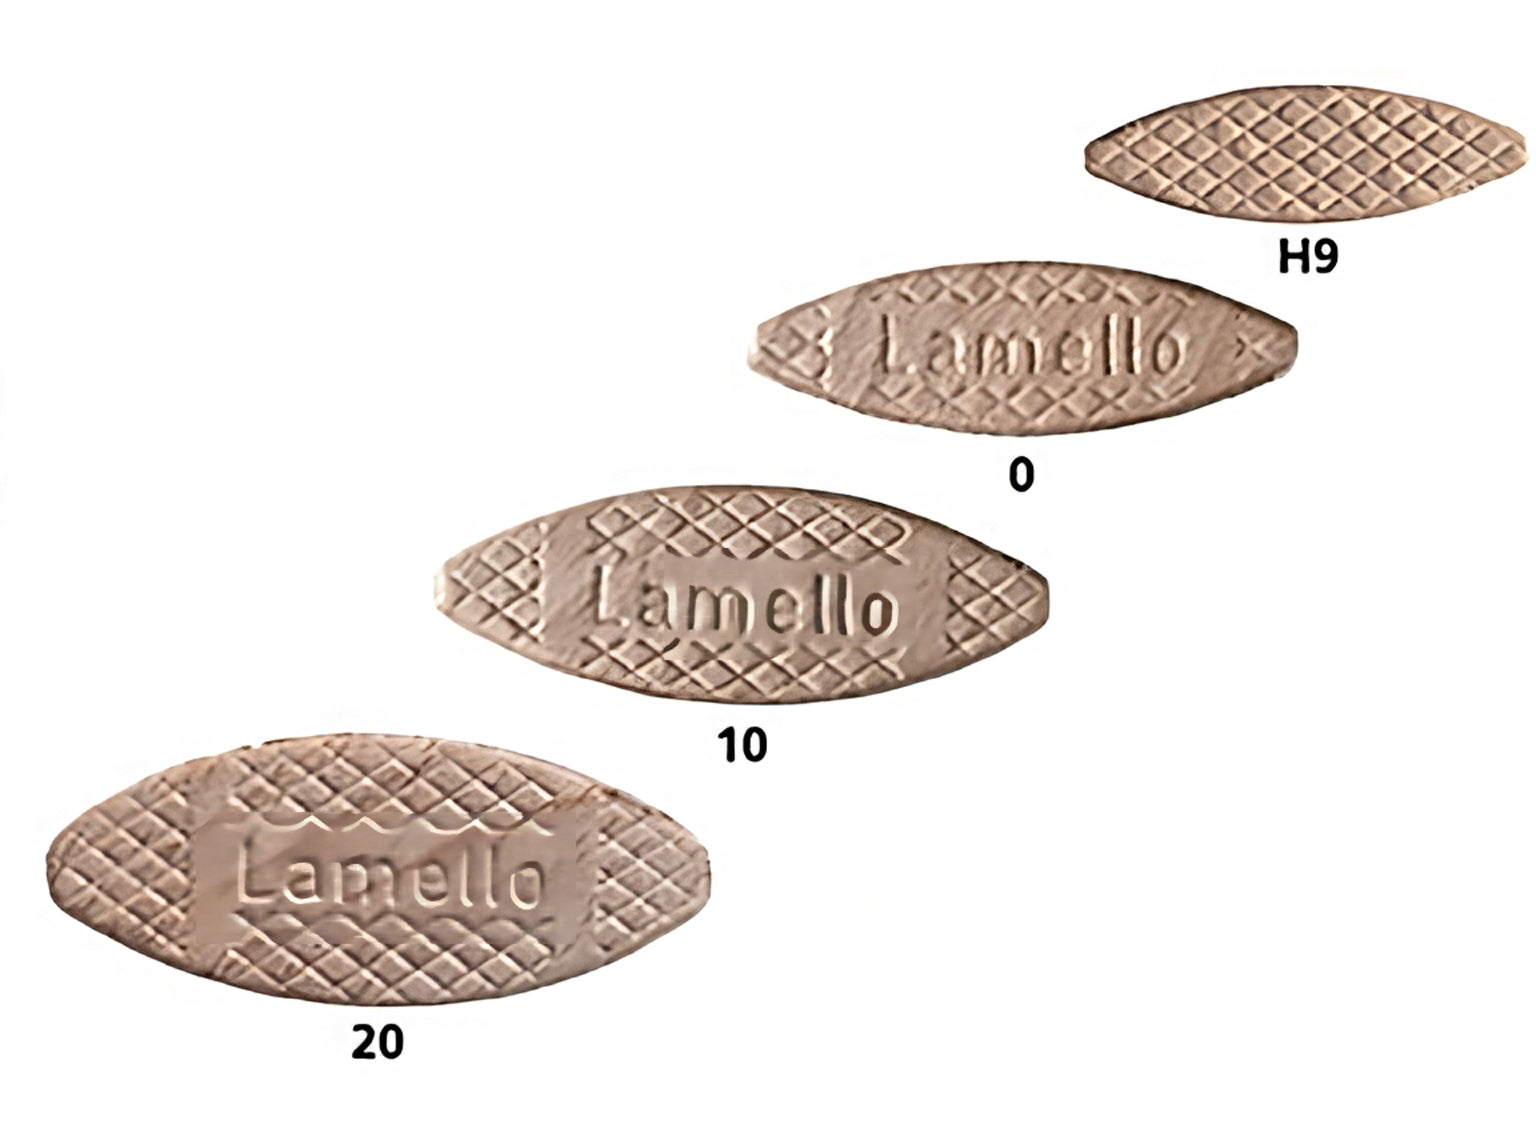 Lamello Wooden Biscuit Connector Blister Packs, Box of 80 and 250